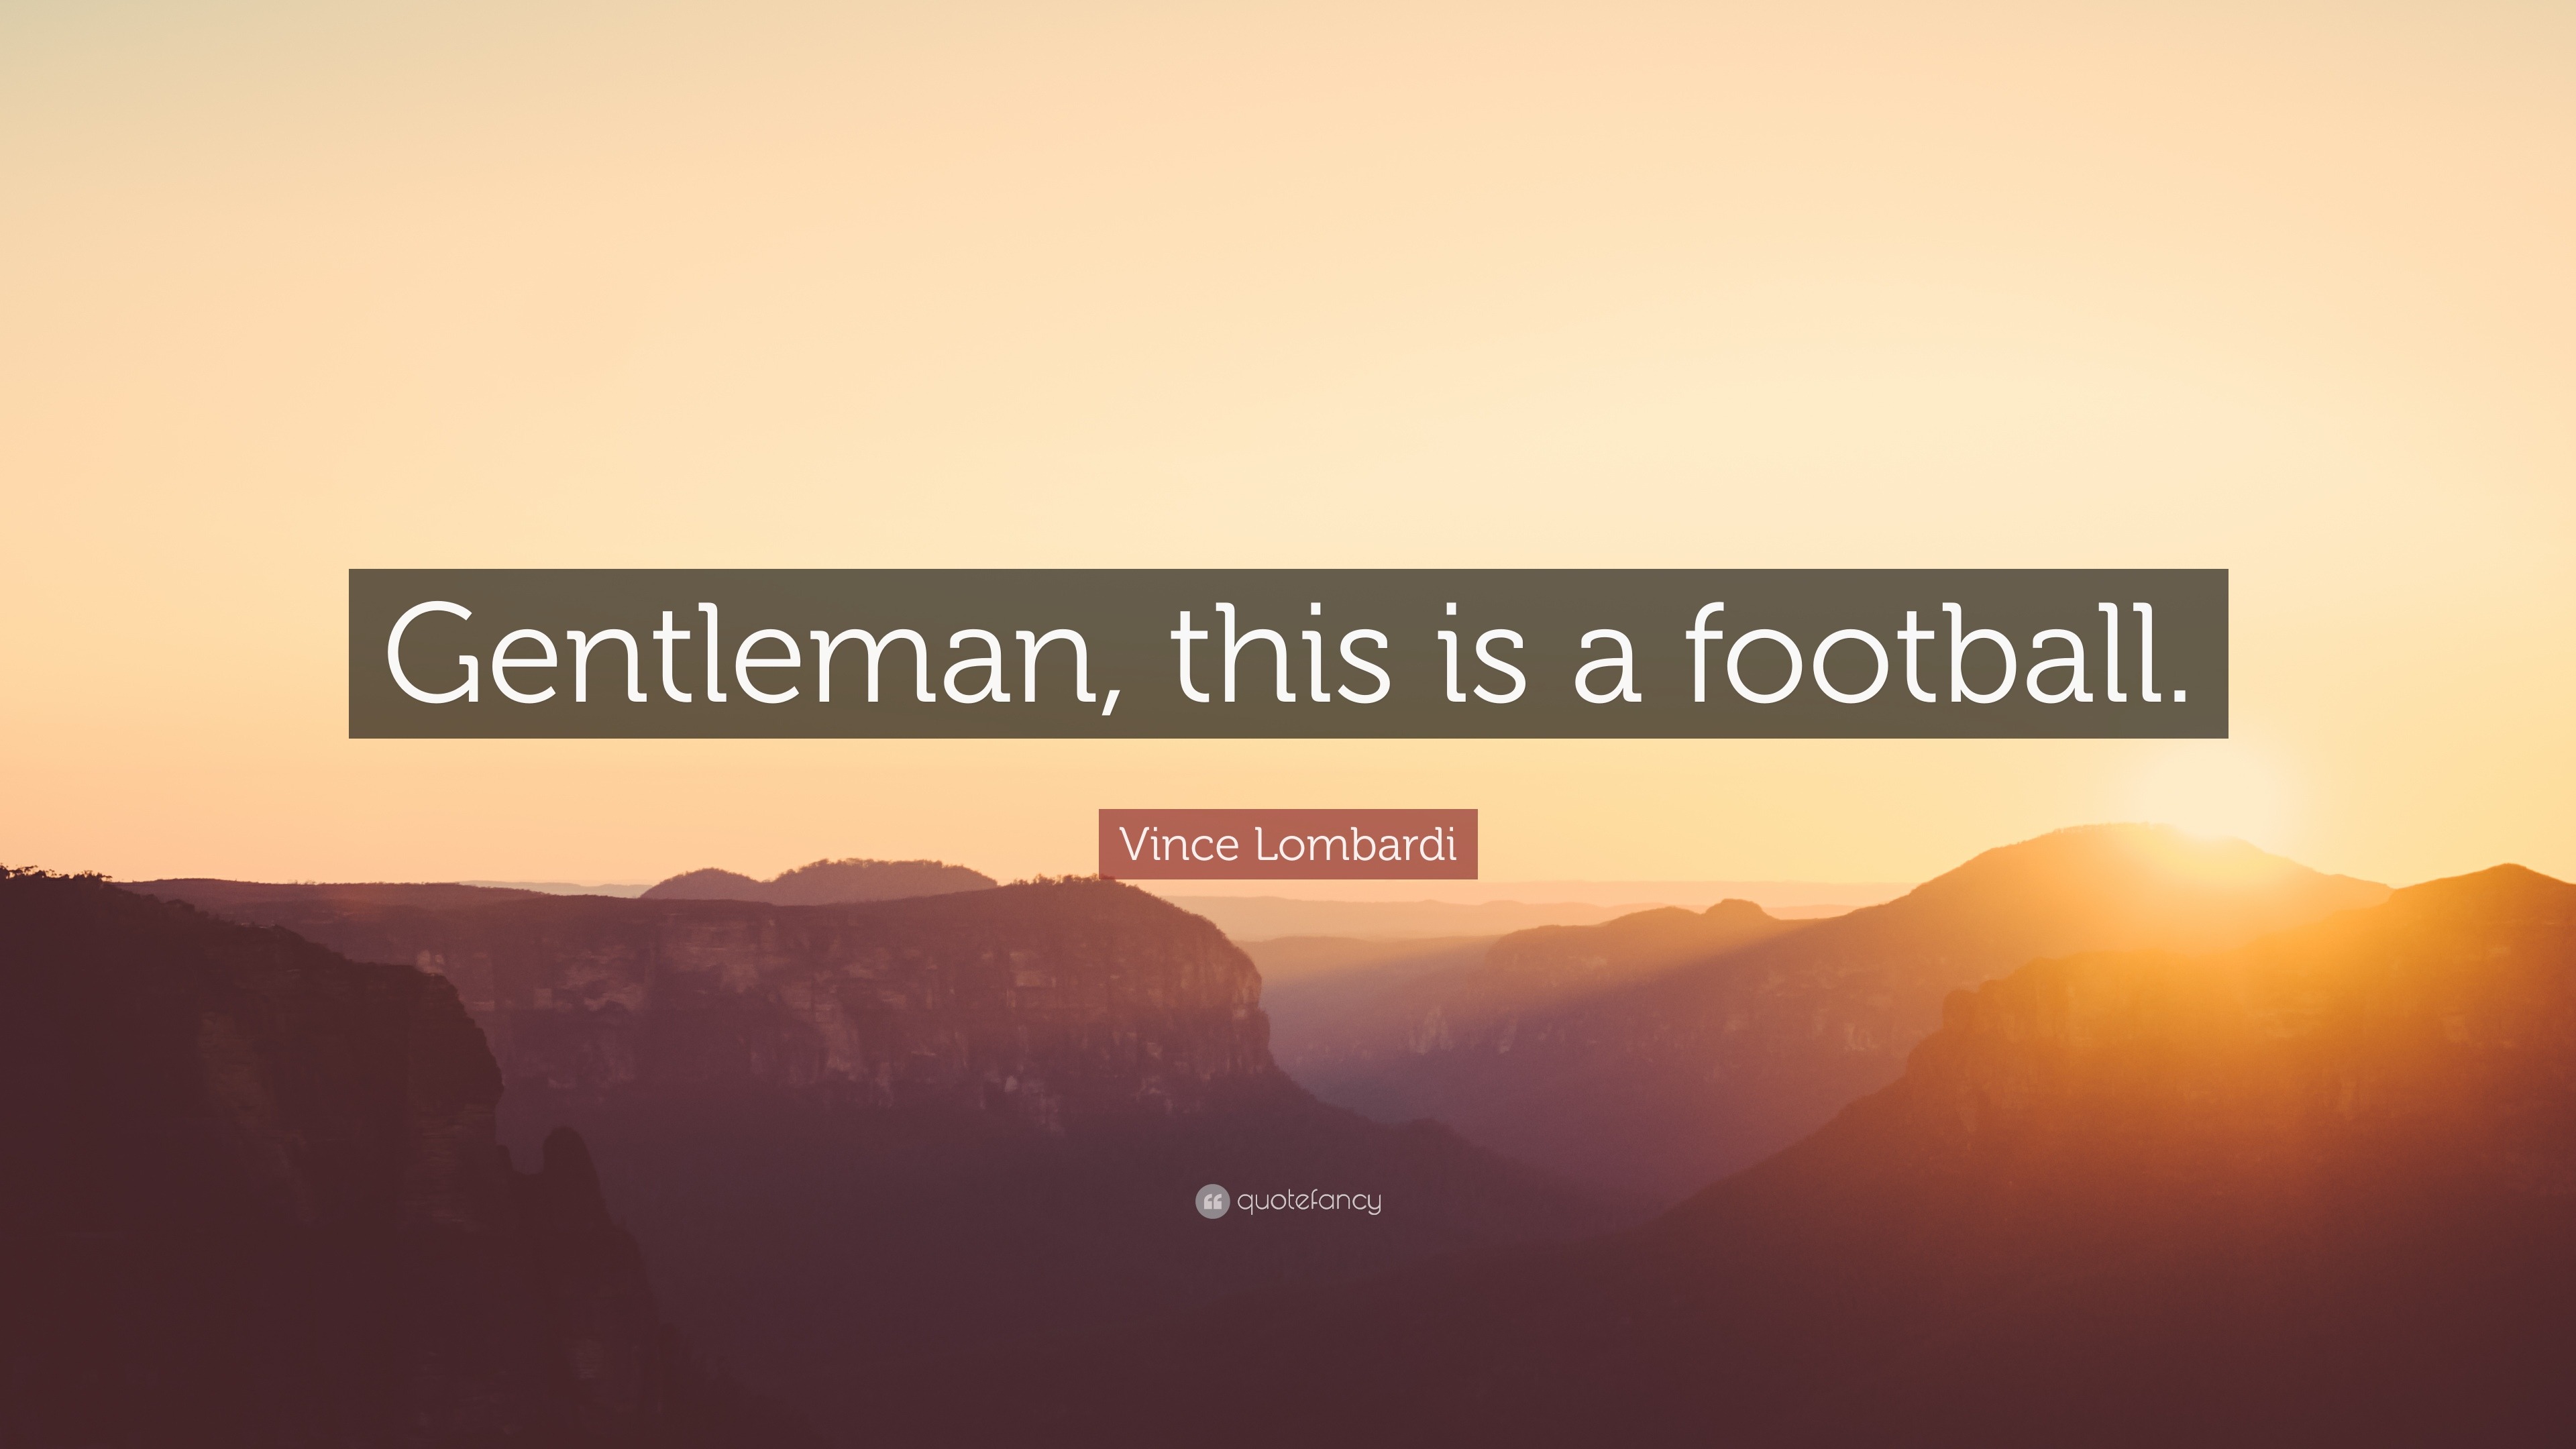 Vince Lombardi Quotes 100 wallpapers  Quotefancy